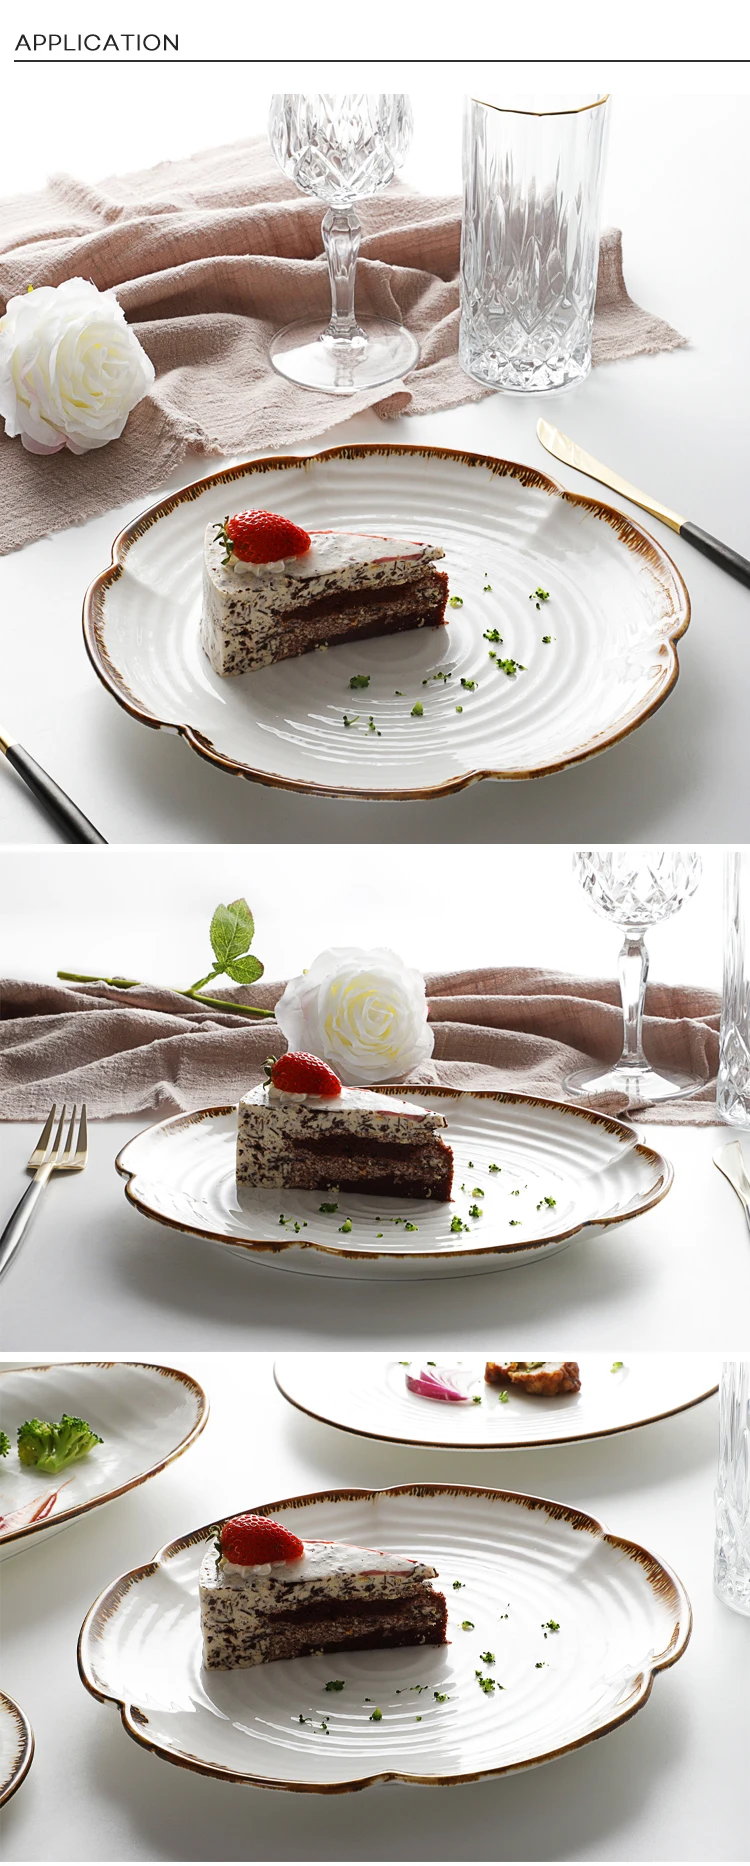 Modern Dishes Dining,  Porcelain Colour Porcelain Plate White, Wedding Plates And Dishes&